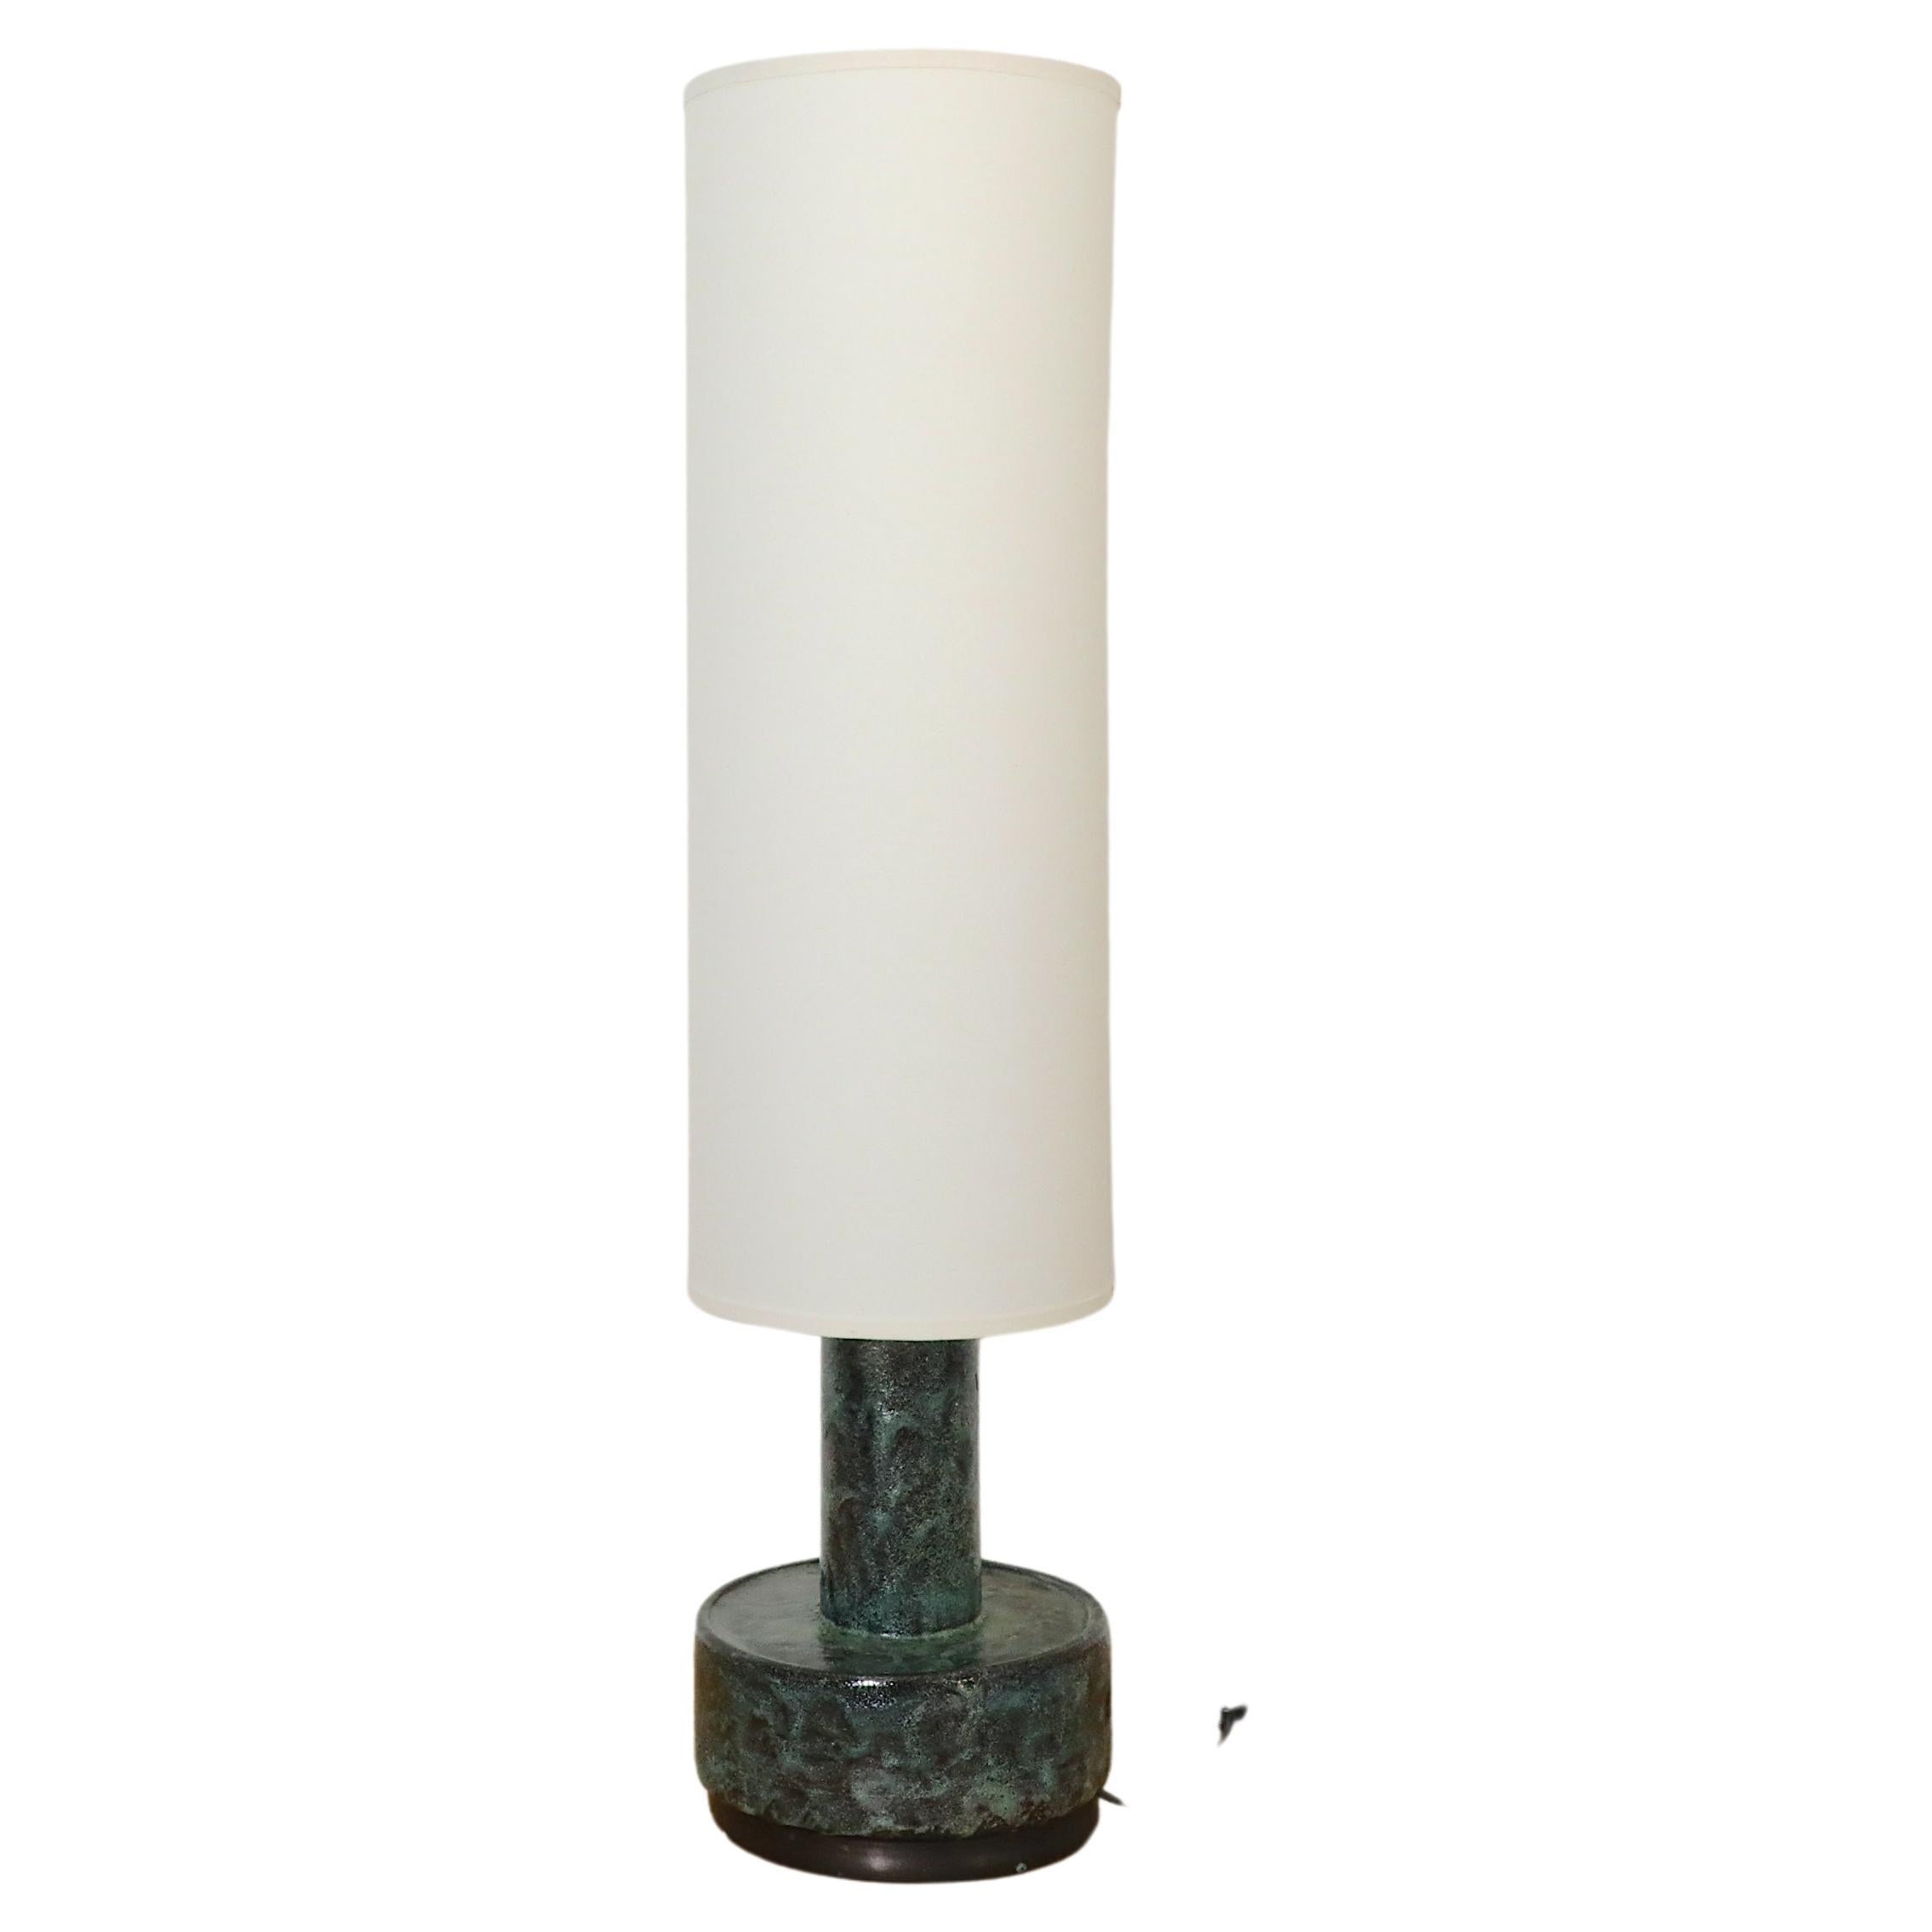 Mid-Century Dijkstra Lampen Green Lava Ceramic Table or Floor Lamp w/ Tall Shade For Sale